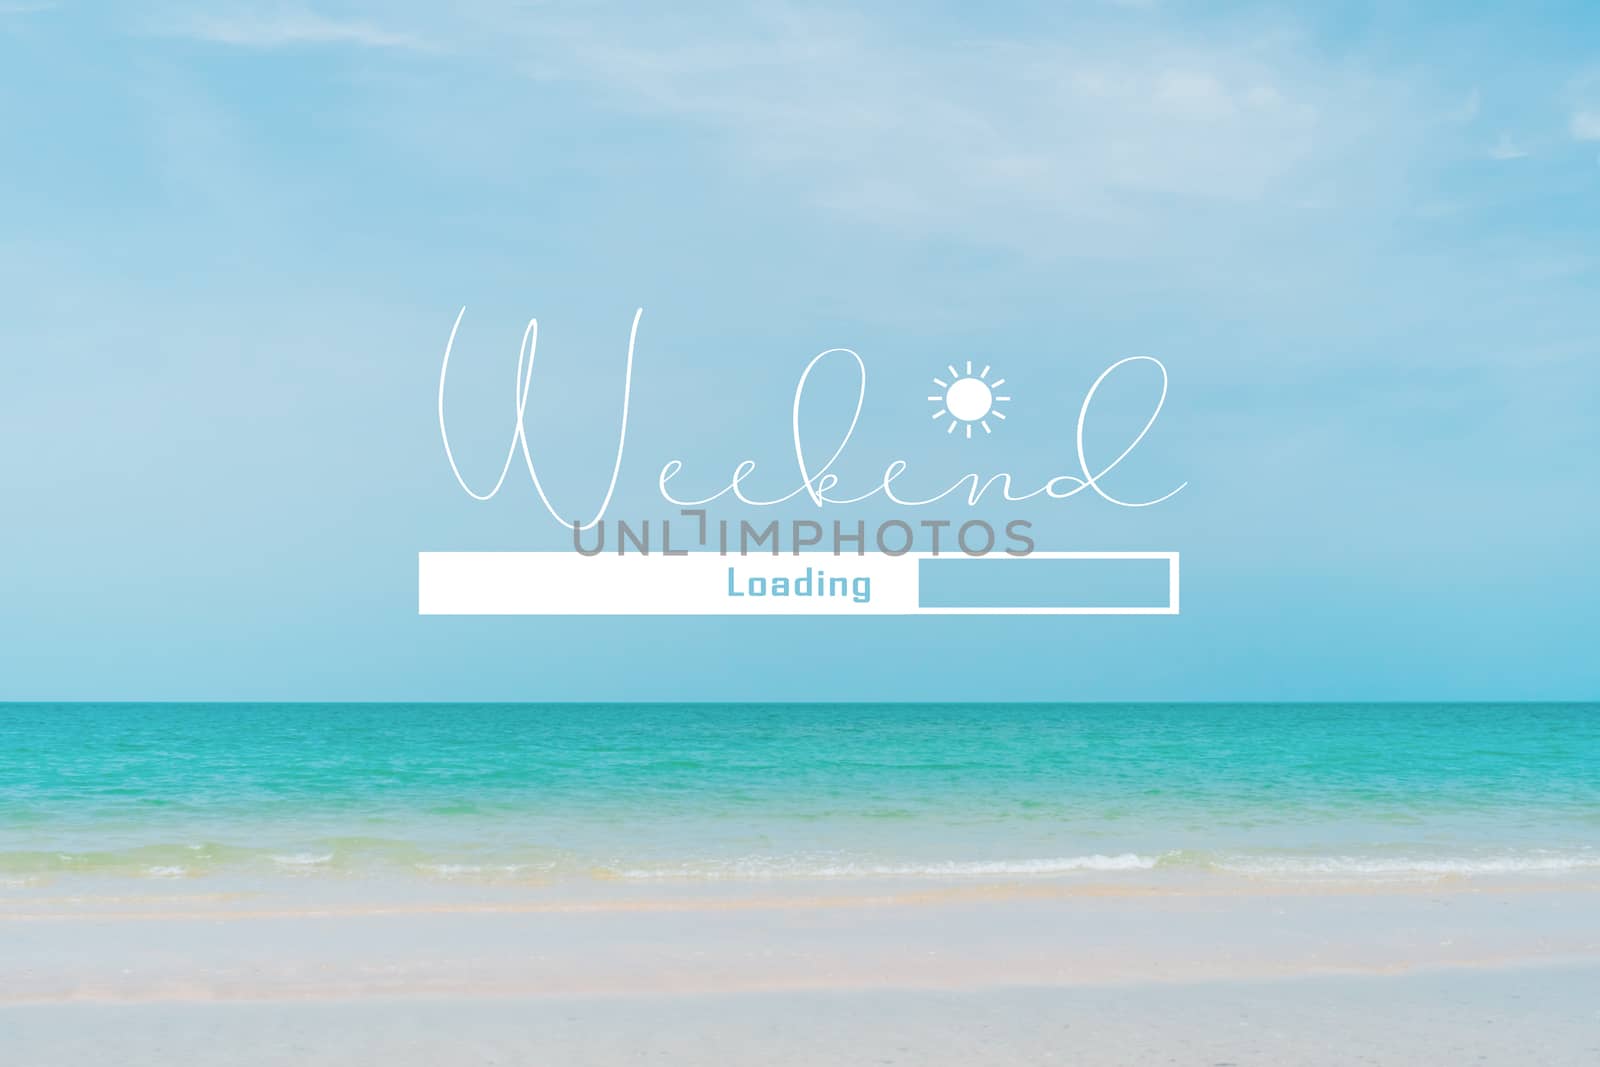 Weekend loading qoute on nature blue sky summer tropical beach. Travel tourism season concept background.